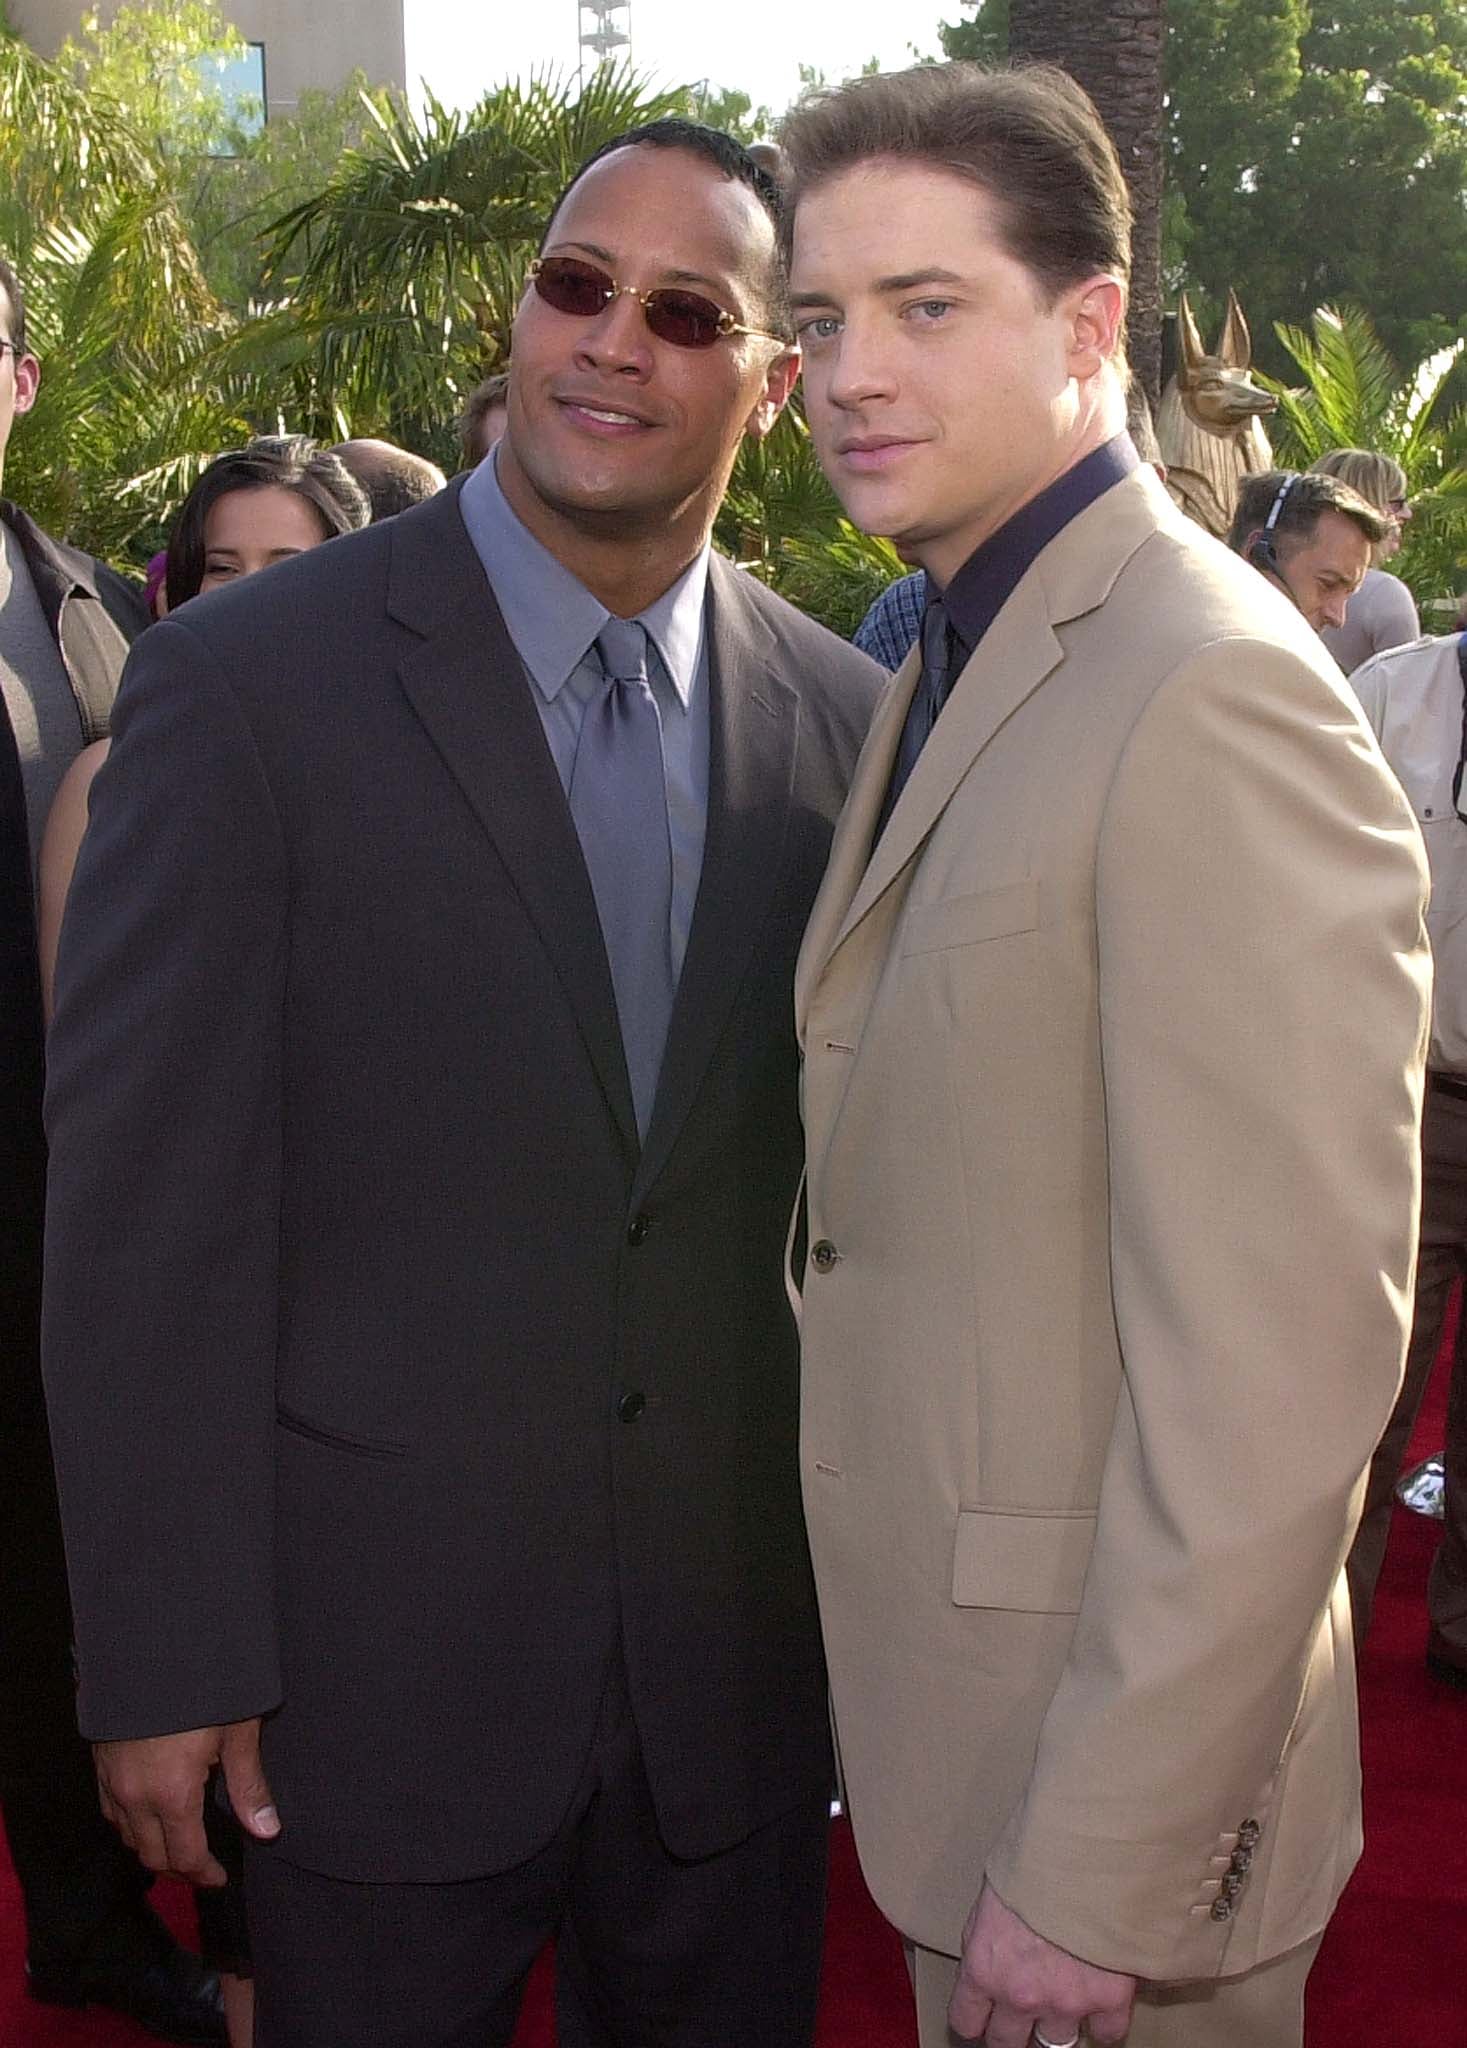 LOS ANGELES, UNITED STATES: US actor Brendan Fraser (R) poses with co-star WWF wrestler/actor The Rock (L) at the premiere of their new film 